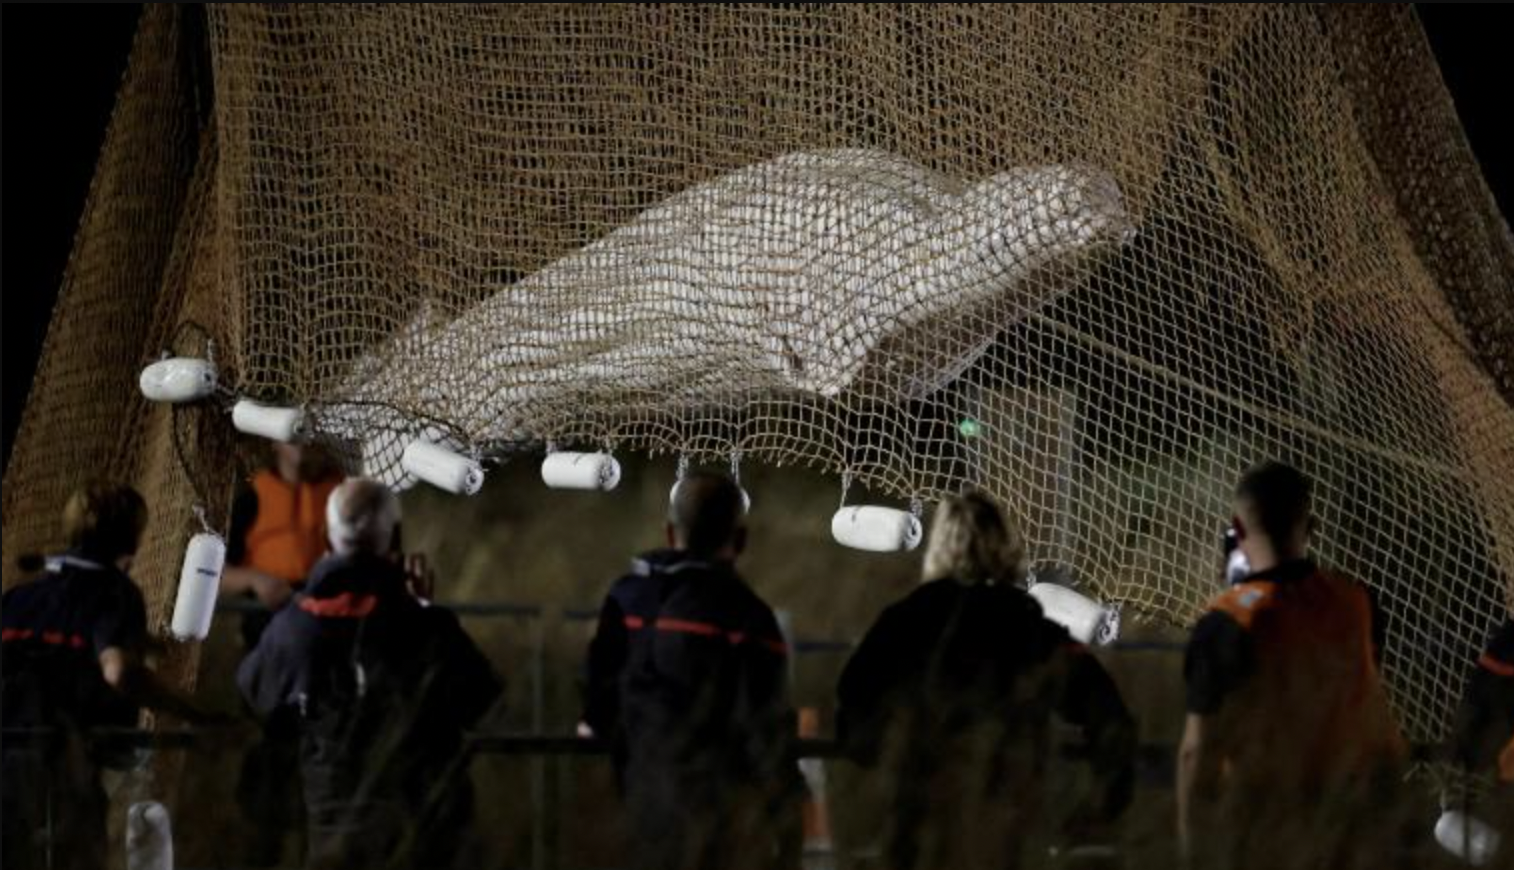 beluga whale rescued from the Seine River